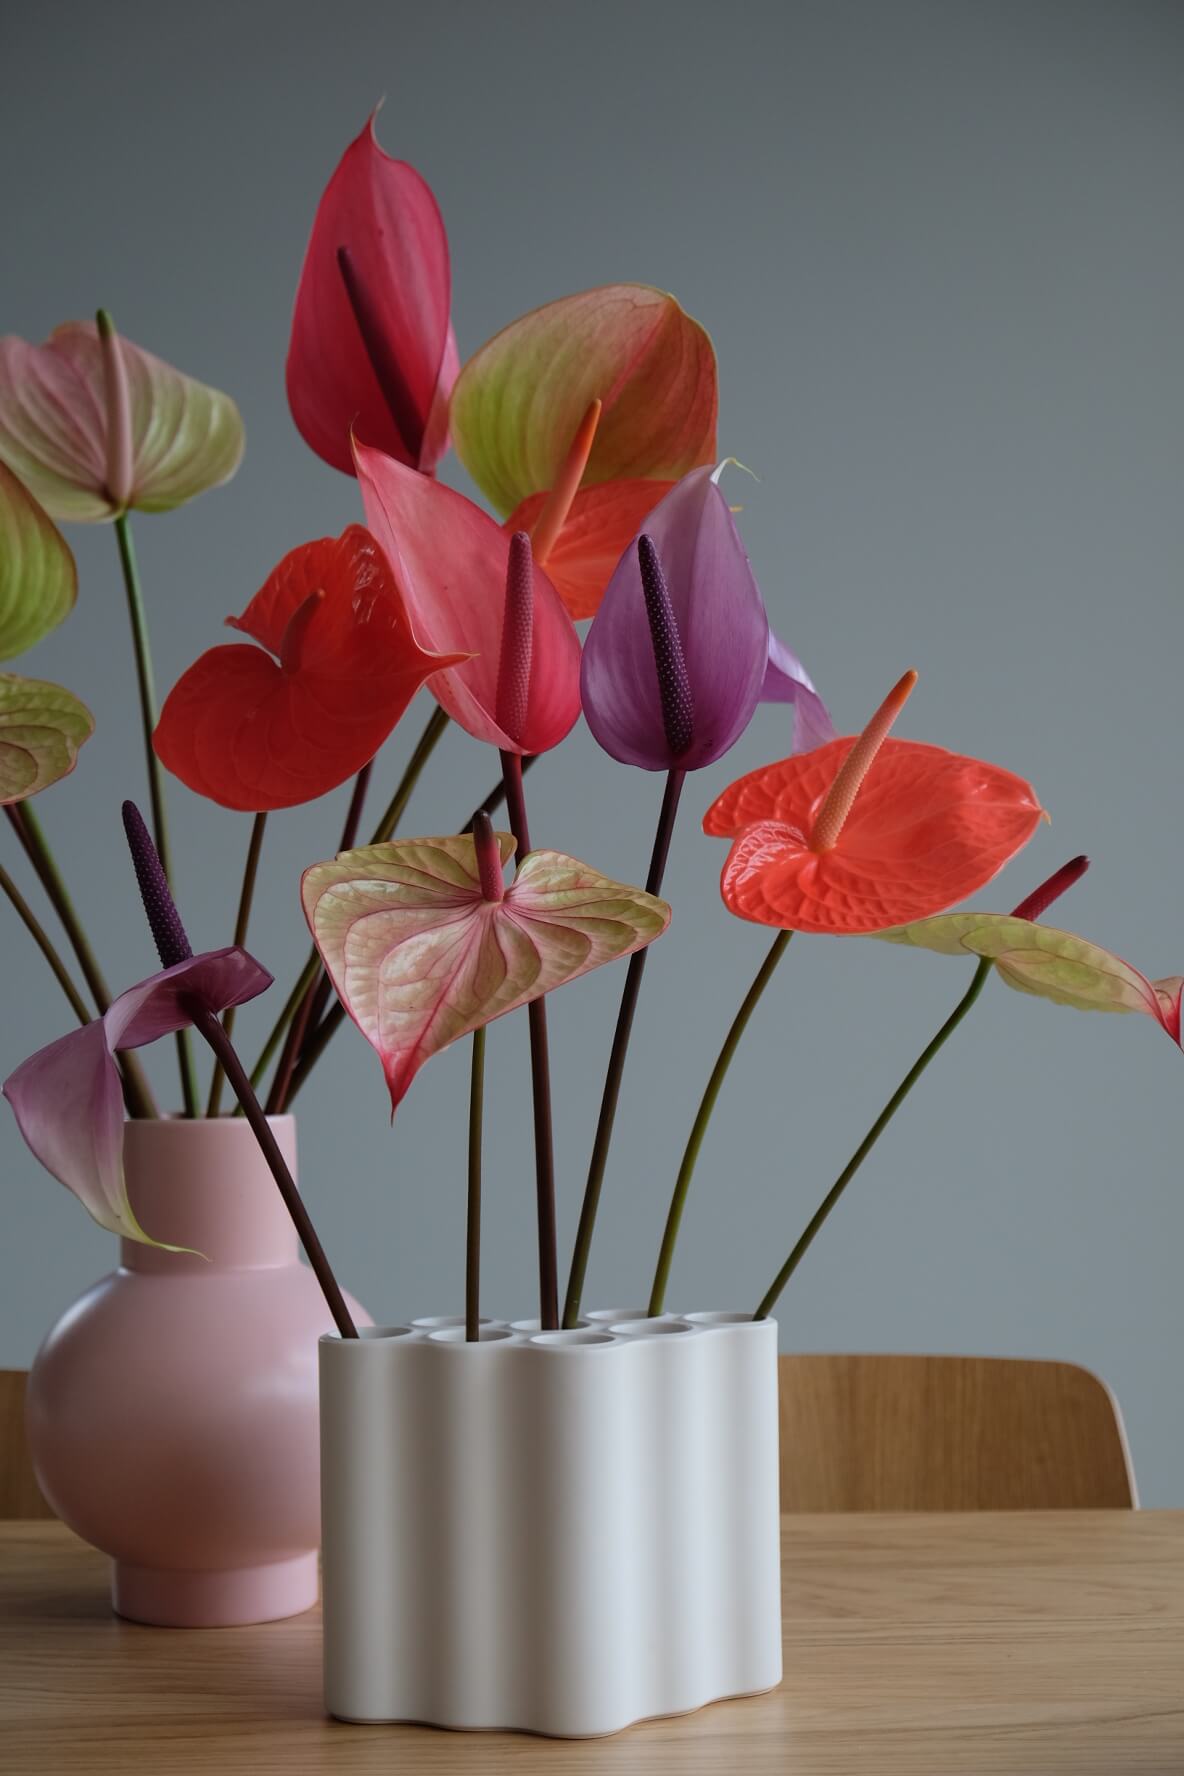 Anthurium flowers in 3 entirely different interiors